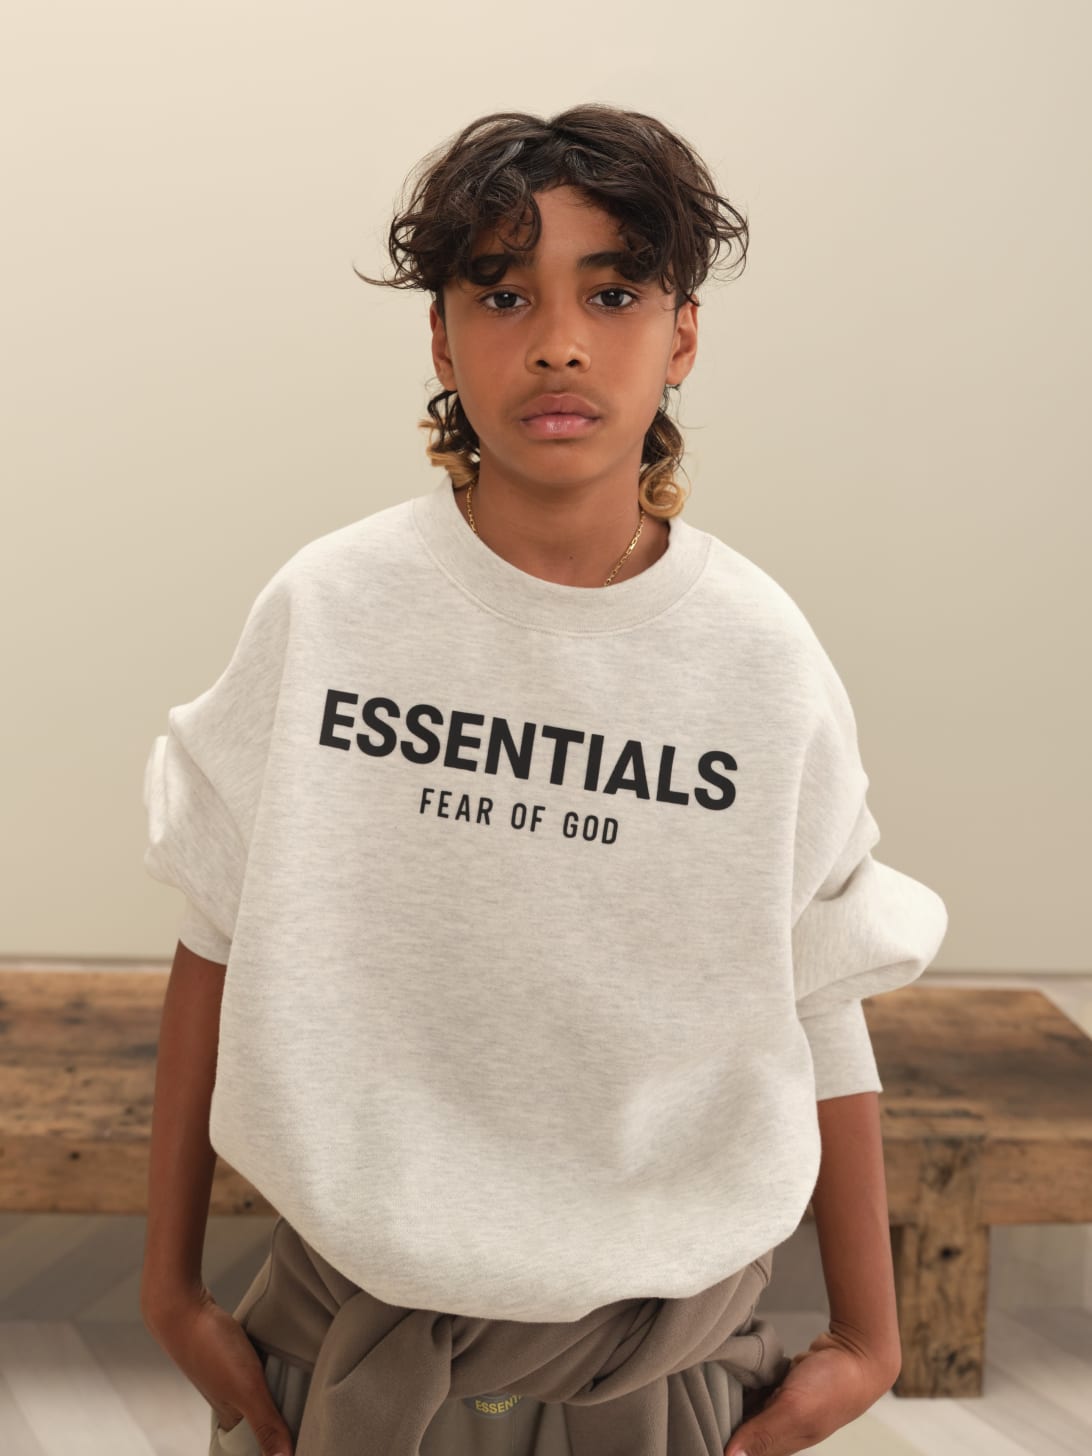 fear of god essentials spring delivery 21 lookbook 1 19 Fear of God ESSENTIALS 2021 tavasz